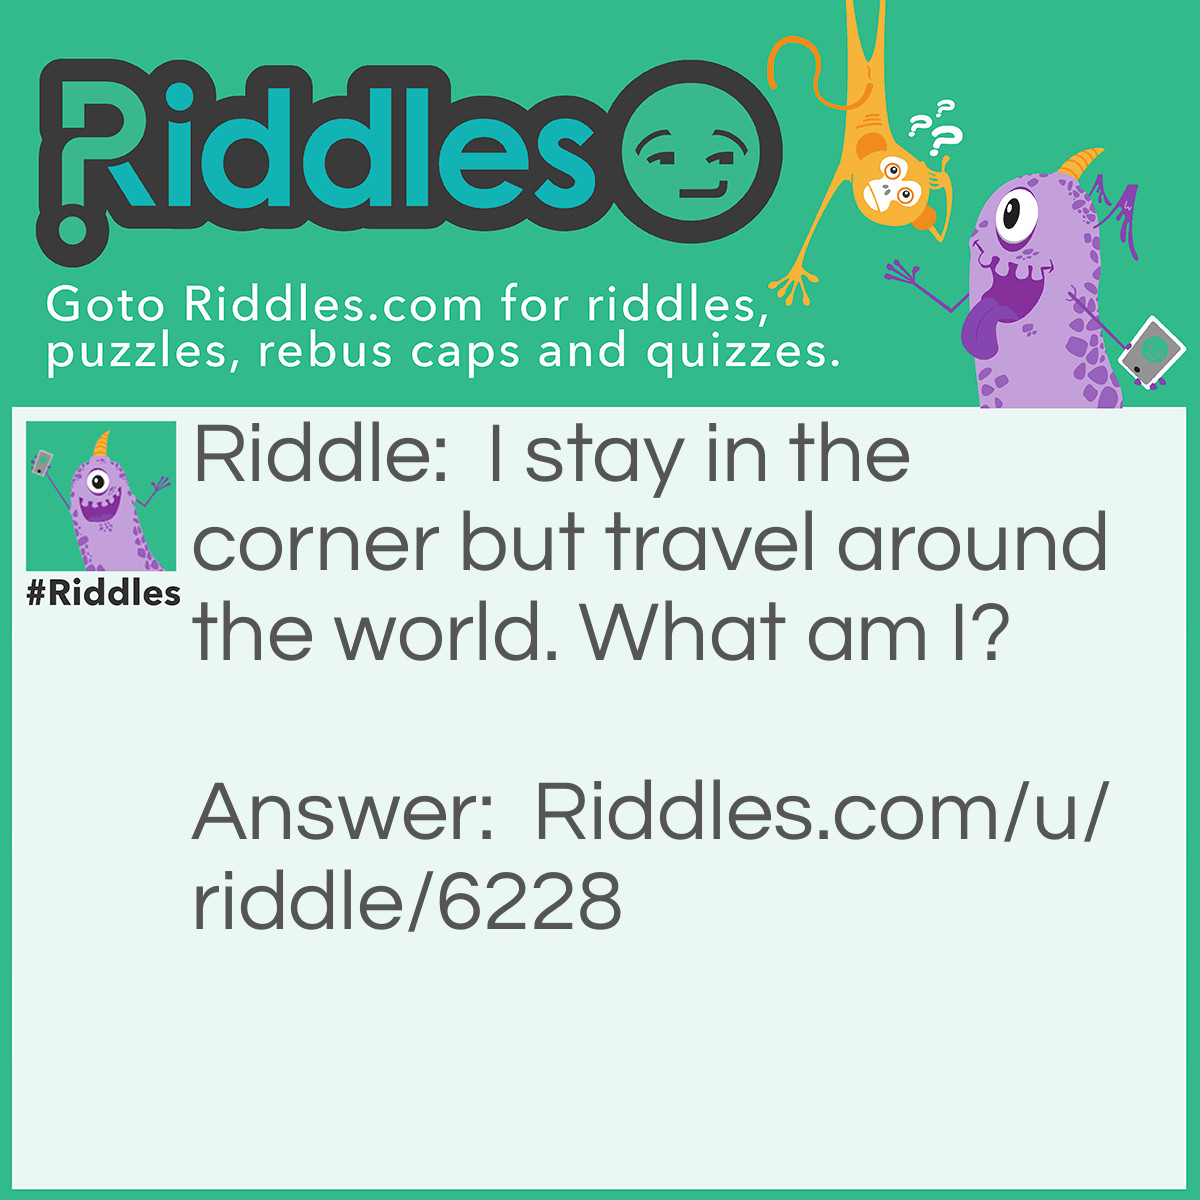 Riddle: I stay in the corner but travel around the world. What am I? Answer: A stamp.